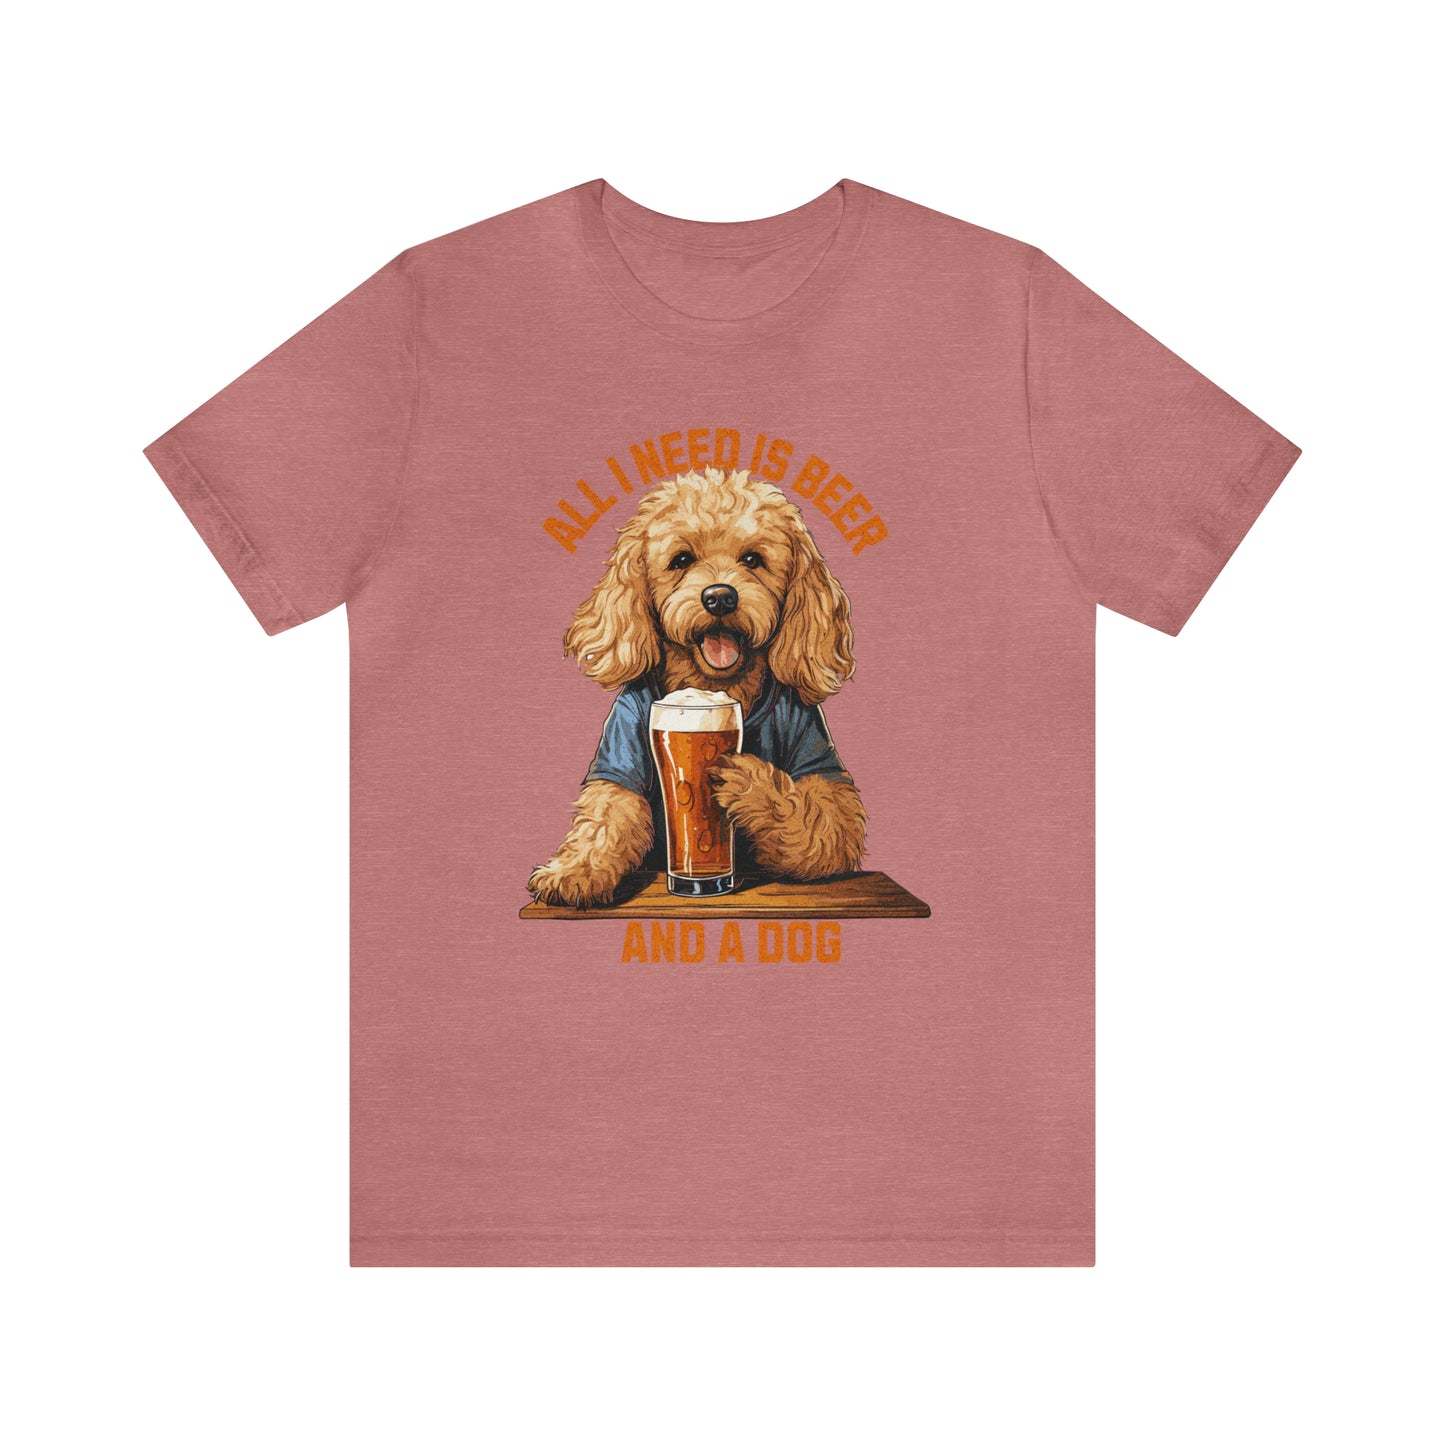 Beer and Dogs T-Shirt, Dog Lover, Beer Lover, Funny, Dog Shirt, Beer Shirt